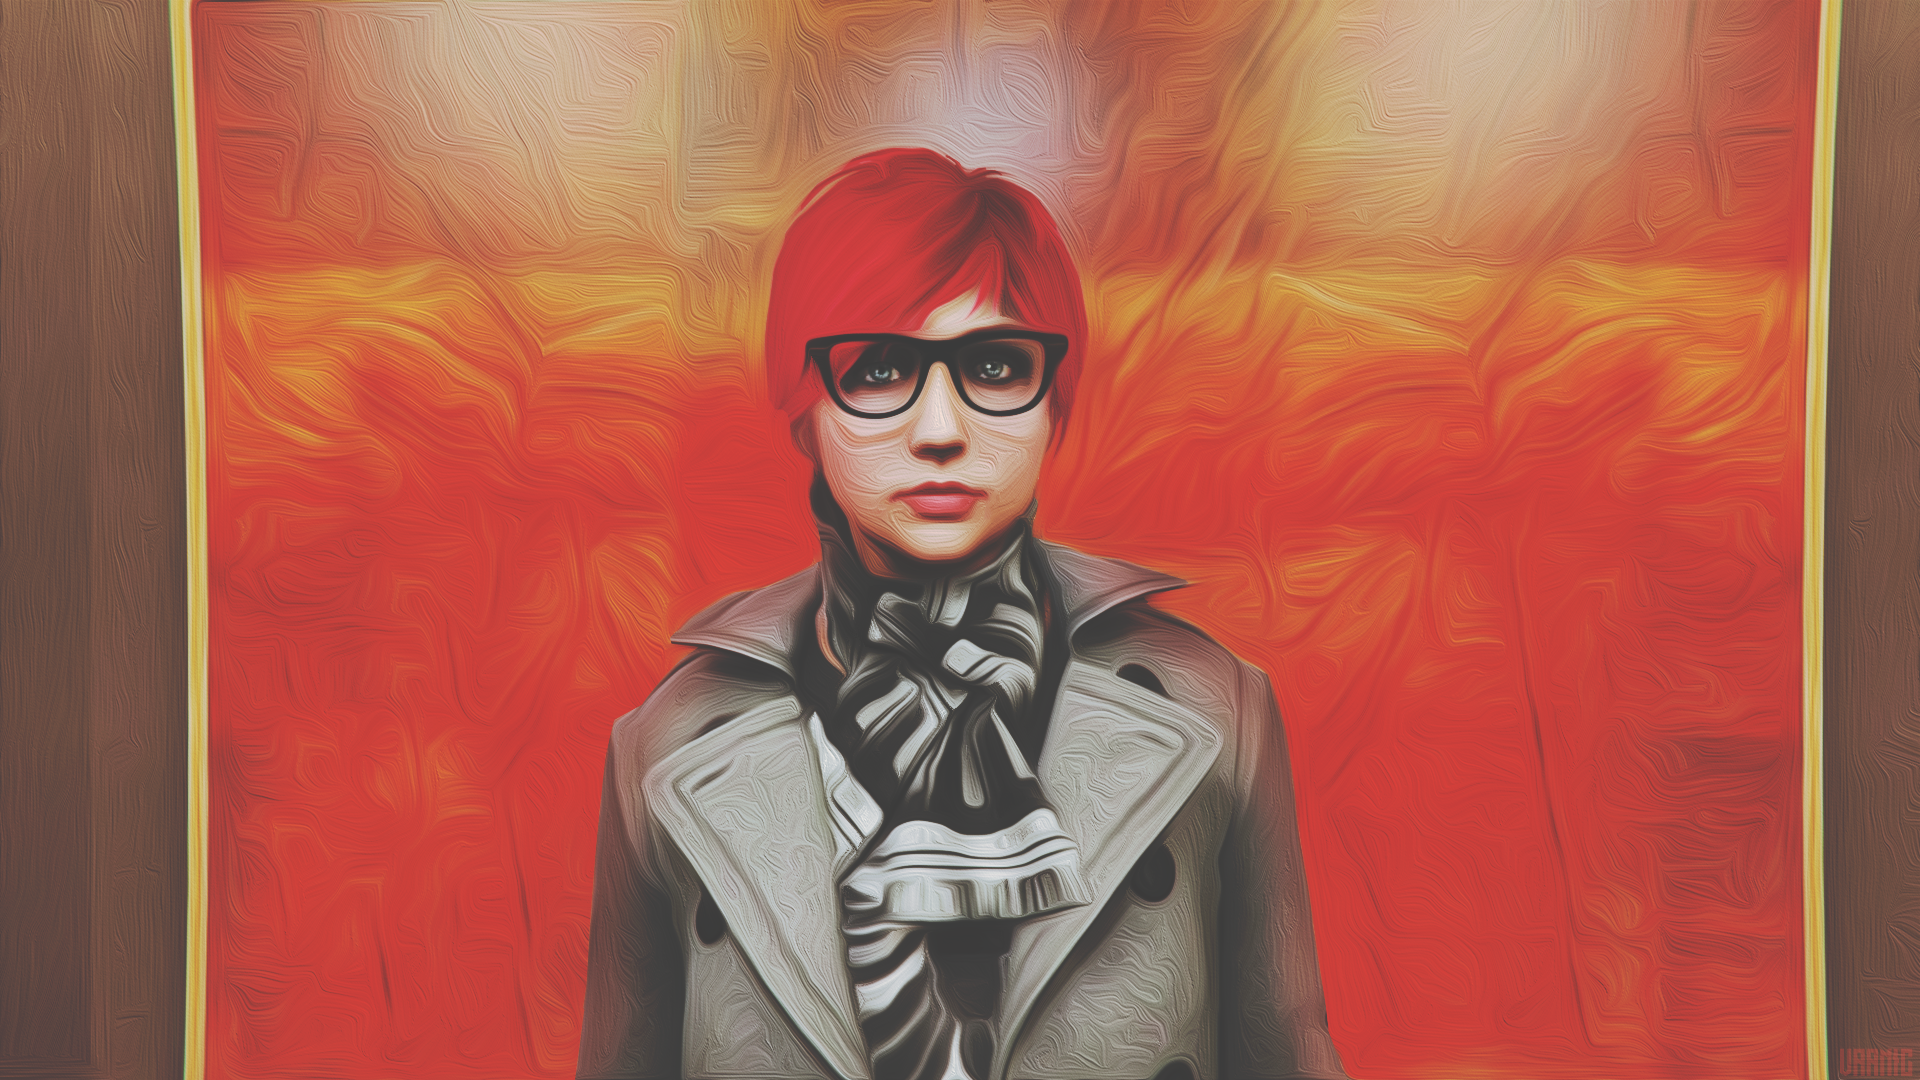 General 1920x1080 women women with glasses overcoats short hair scarf redhead video games